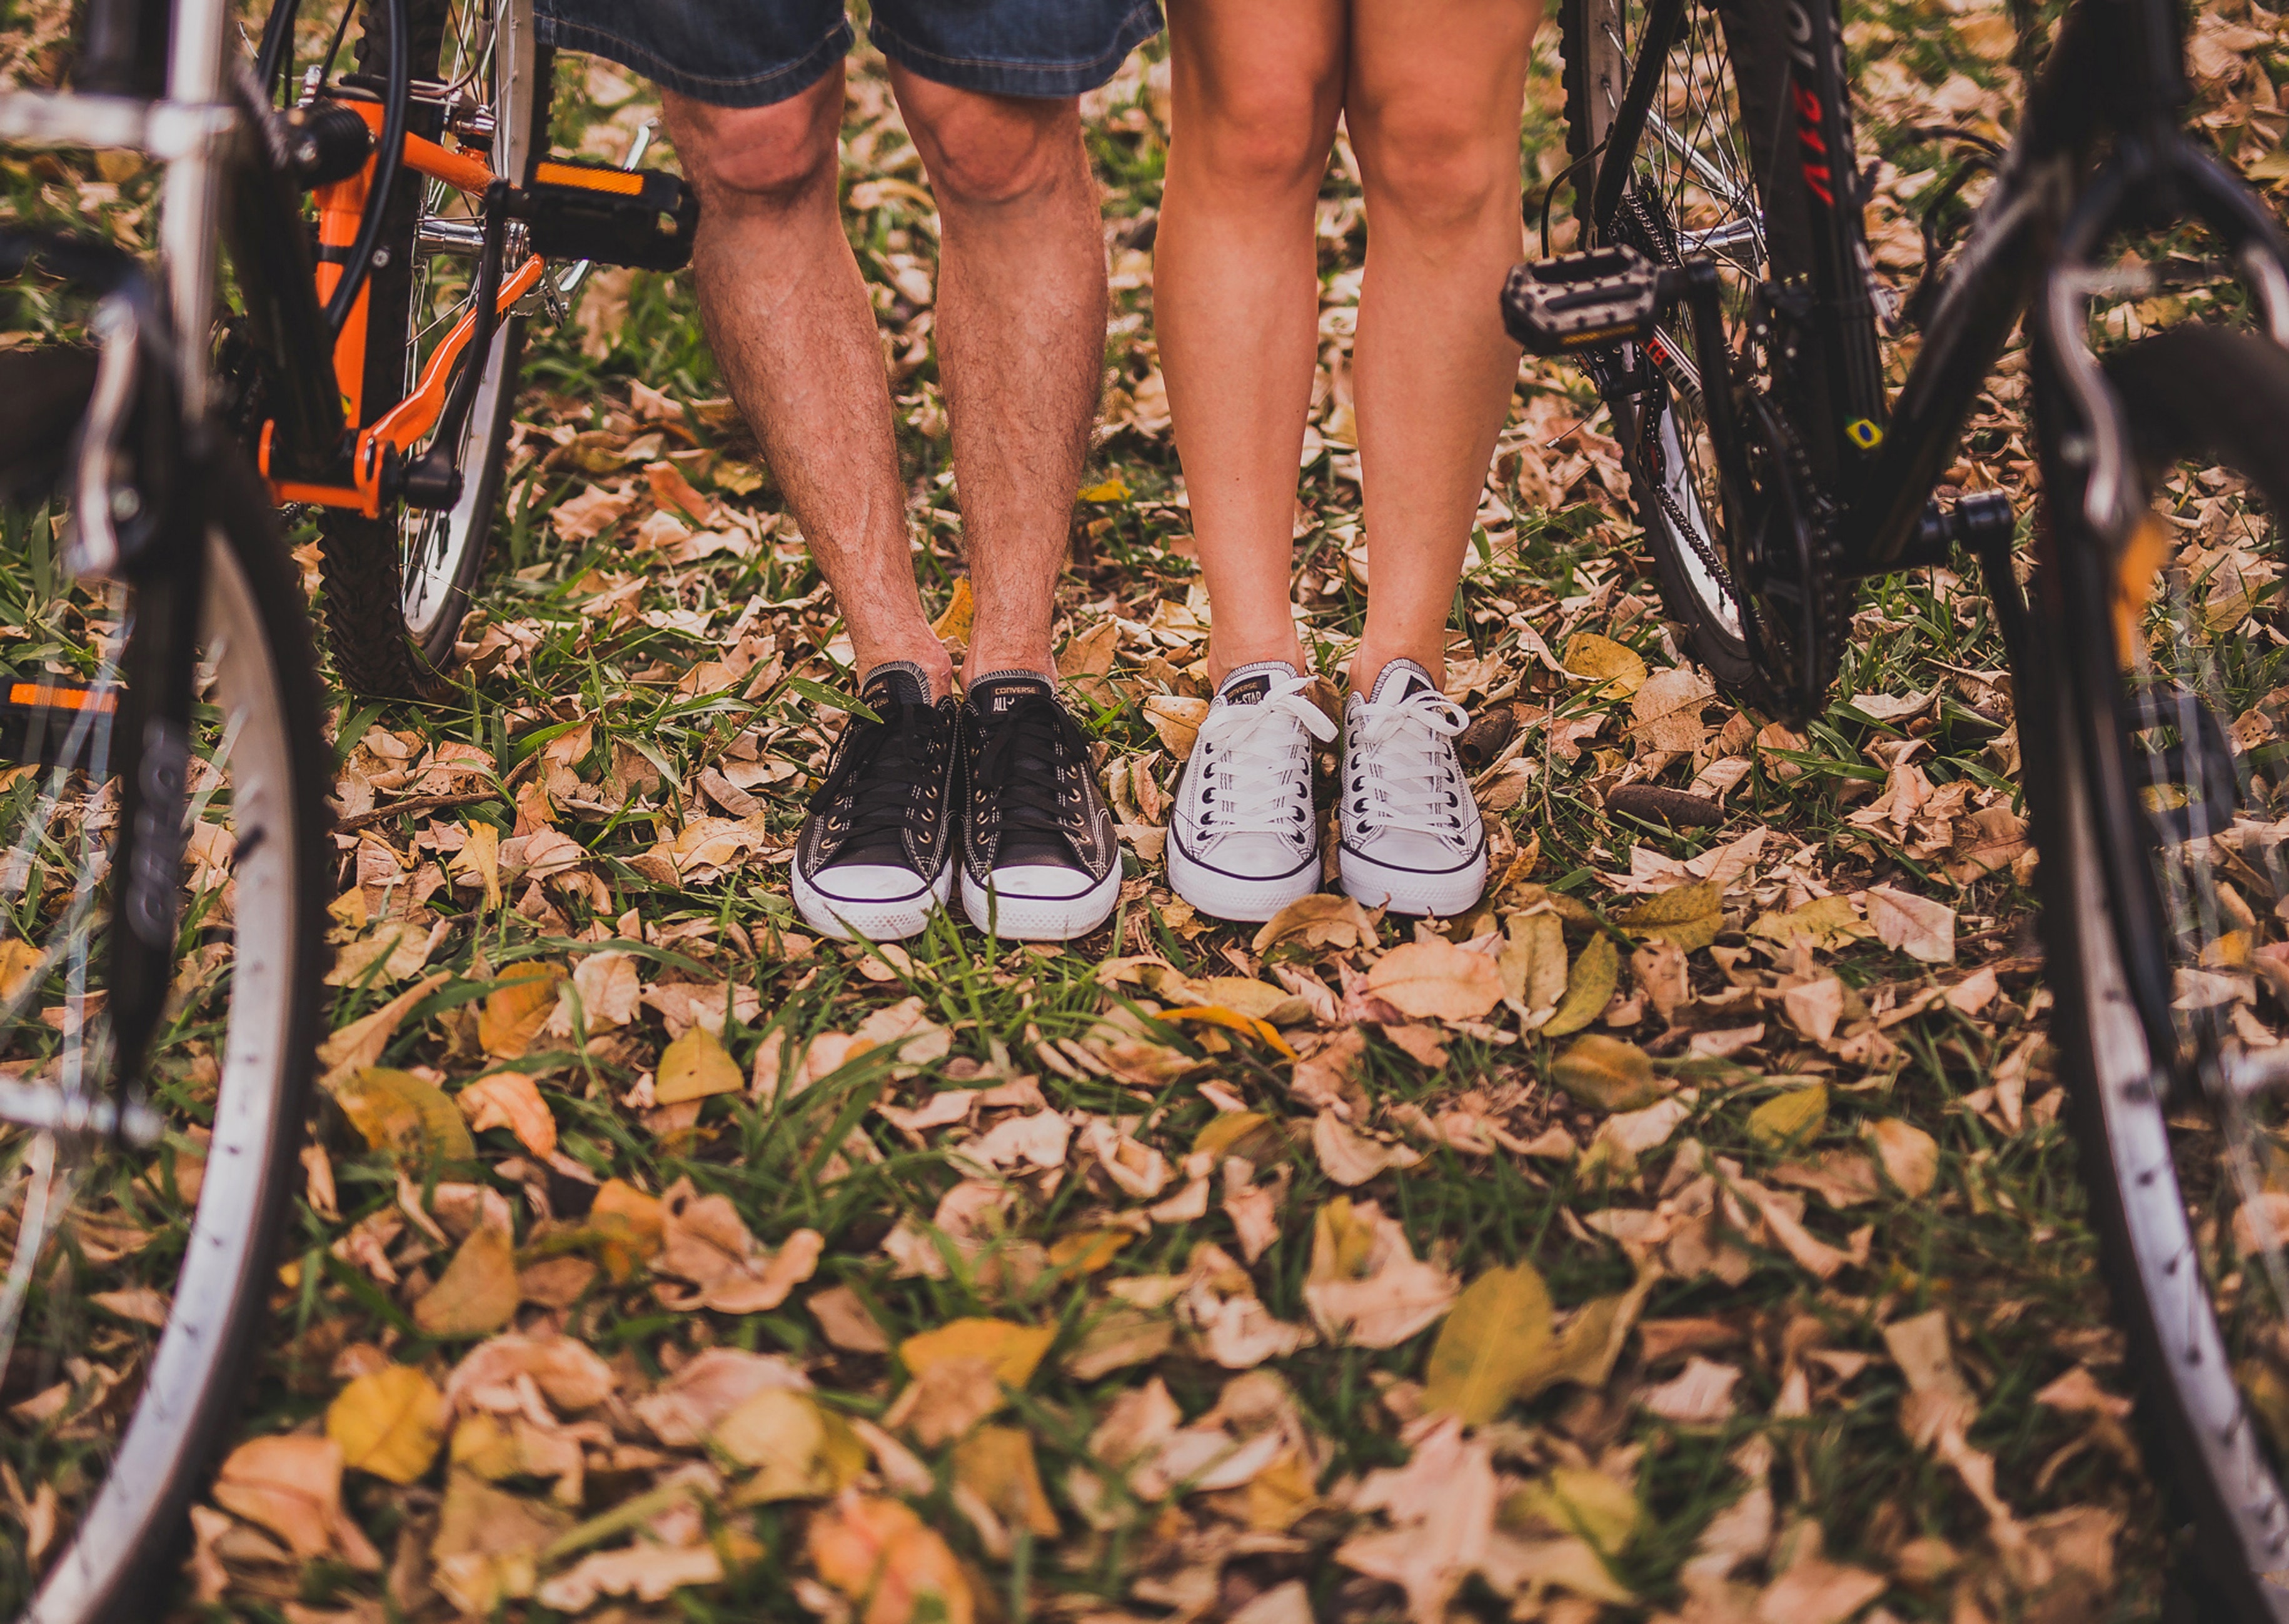 Image of a man a woman's legs with bicycles